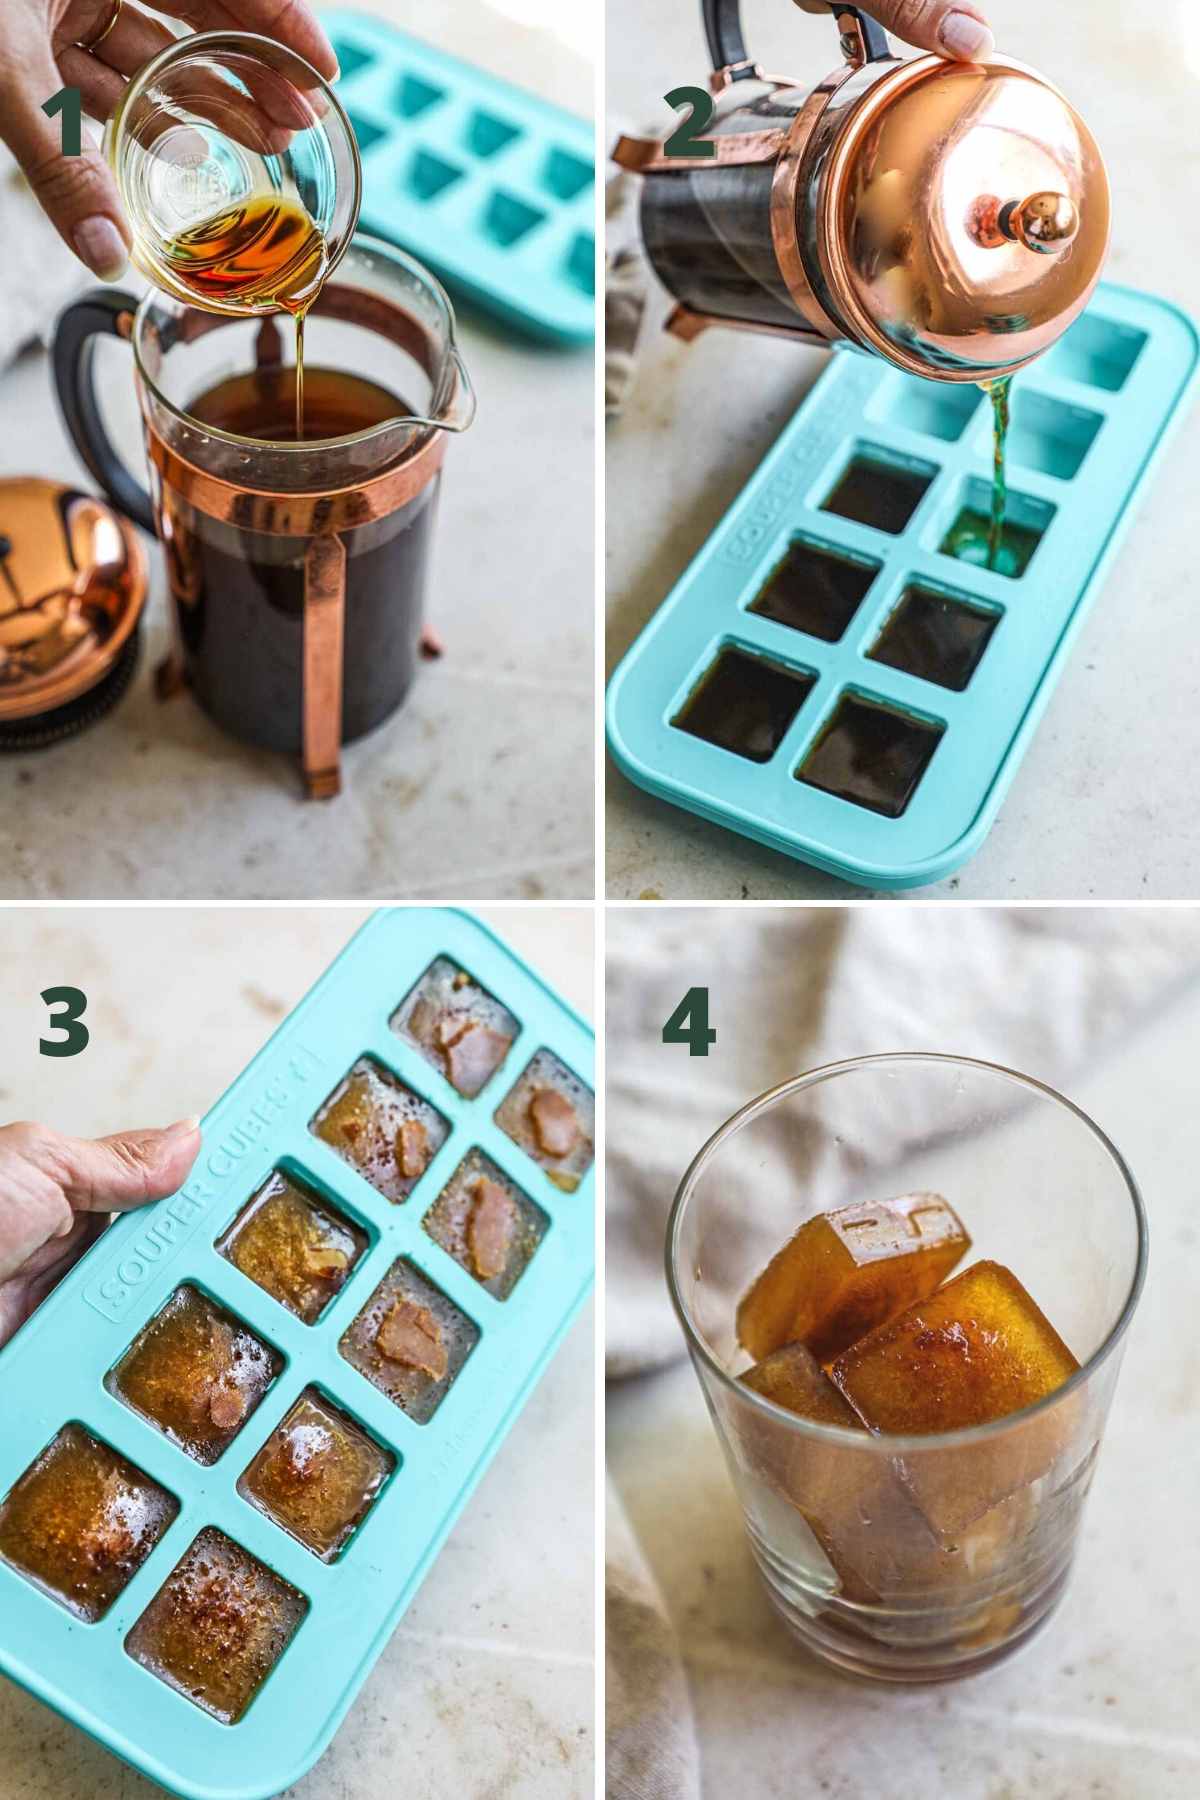 Steps to make coffee ice cubes, including adding the sweetener to brewed coffee, pouring the coffee into ie cubes trays, freezing the coffee ice cubes, and putting the ice cubes in a glass.